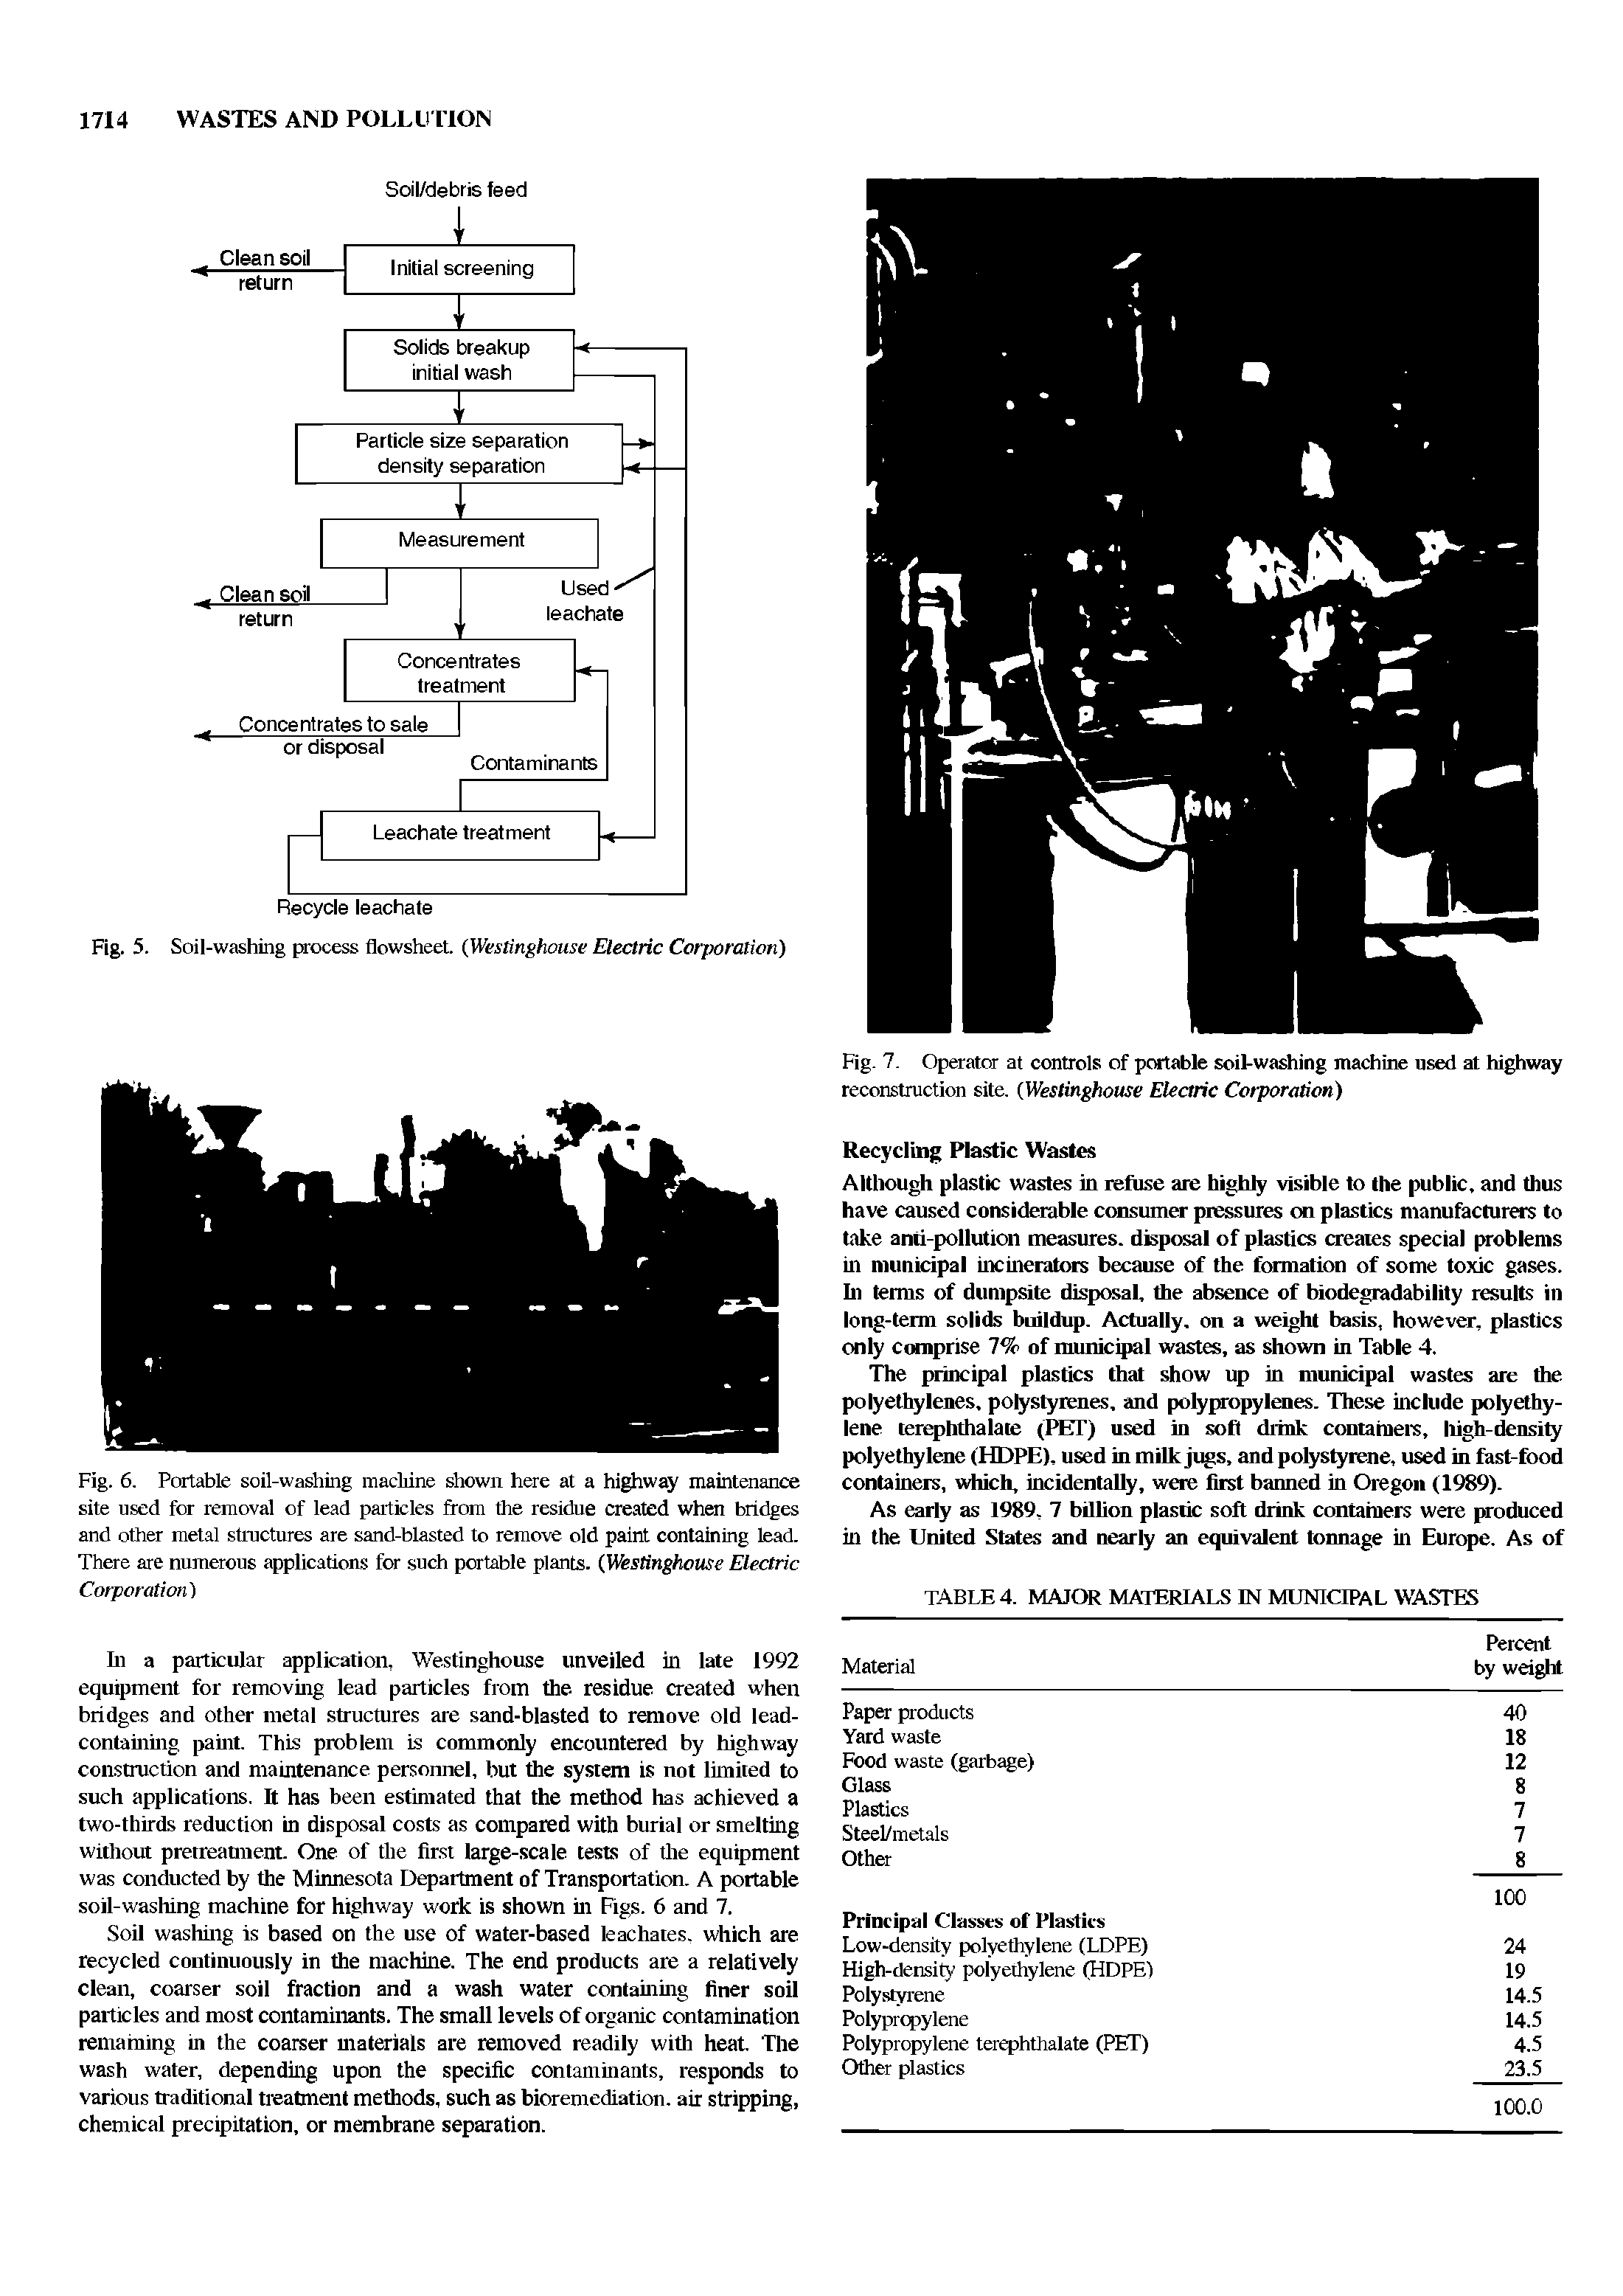 Fig. 6. Portable soil-washing machine shown here at a highway maintenance site used for removal of lead particles from the residue created when bridges and other metal structures are sand-blasted to remove old paint containing lead. There are numerous applications for such portable plants. (Westinghouse Electric Corporation)...